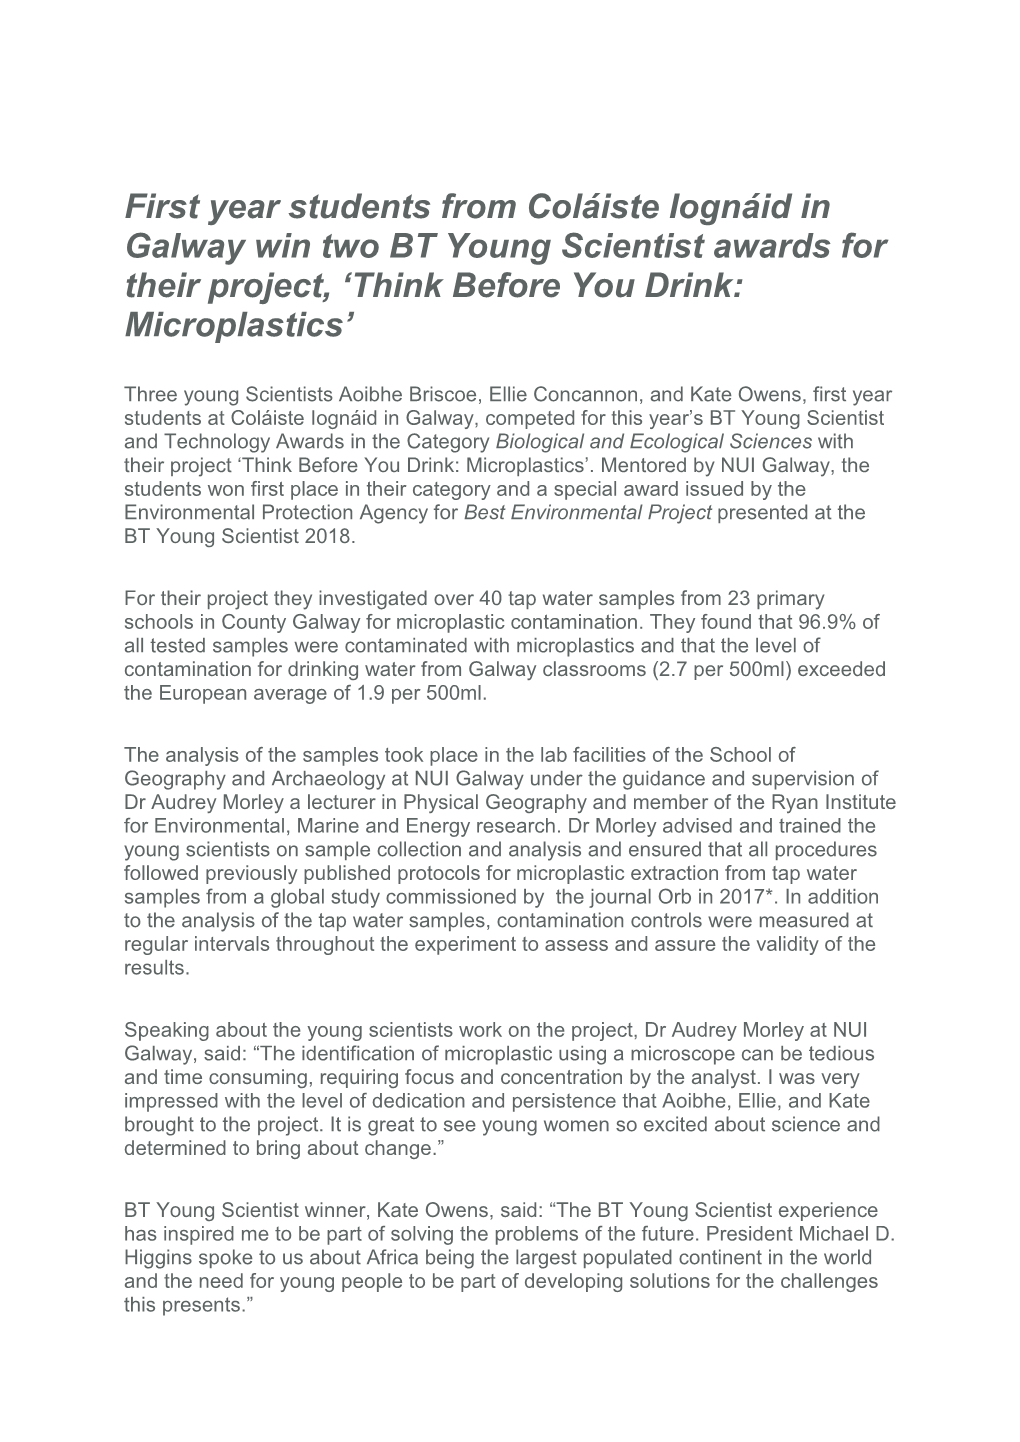 First Year Students from Coláiste Iognáid in Galway Win Two BT Young Scientist Awards for Their Project, 'Think Before You D